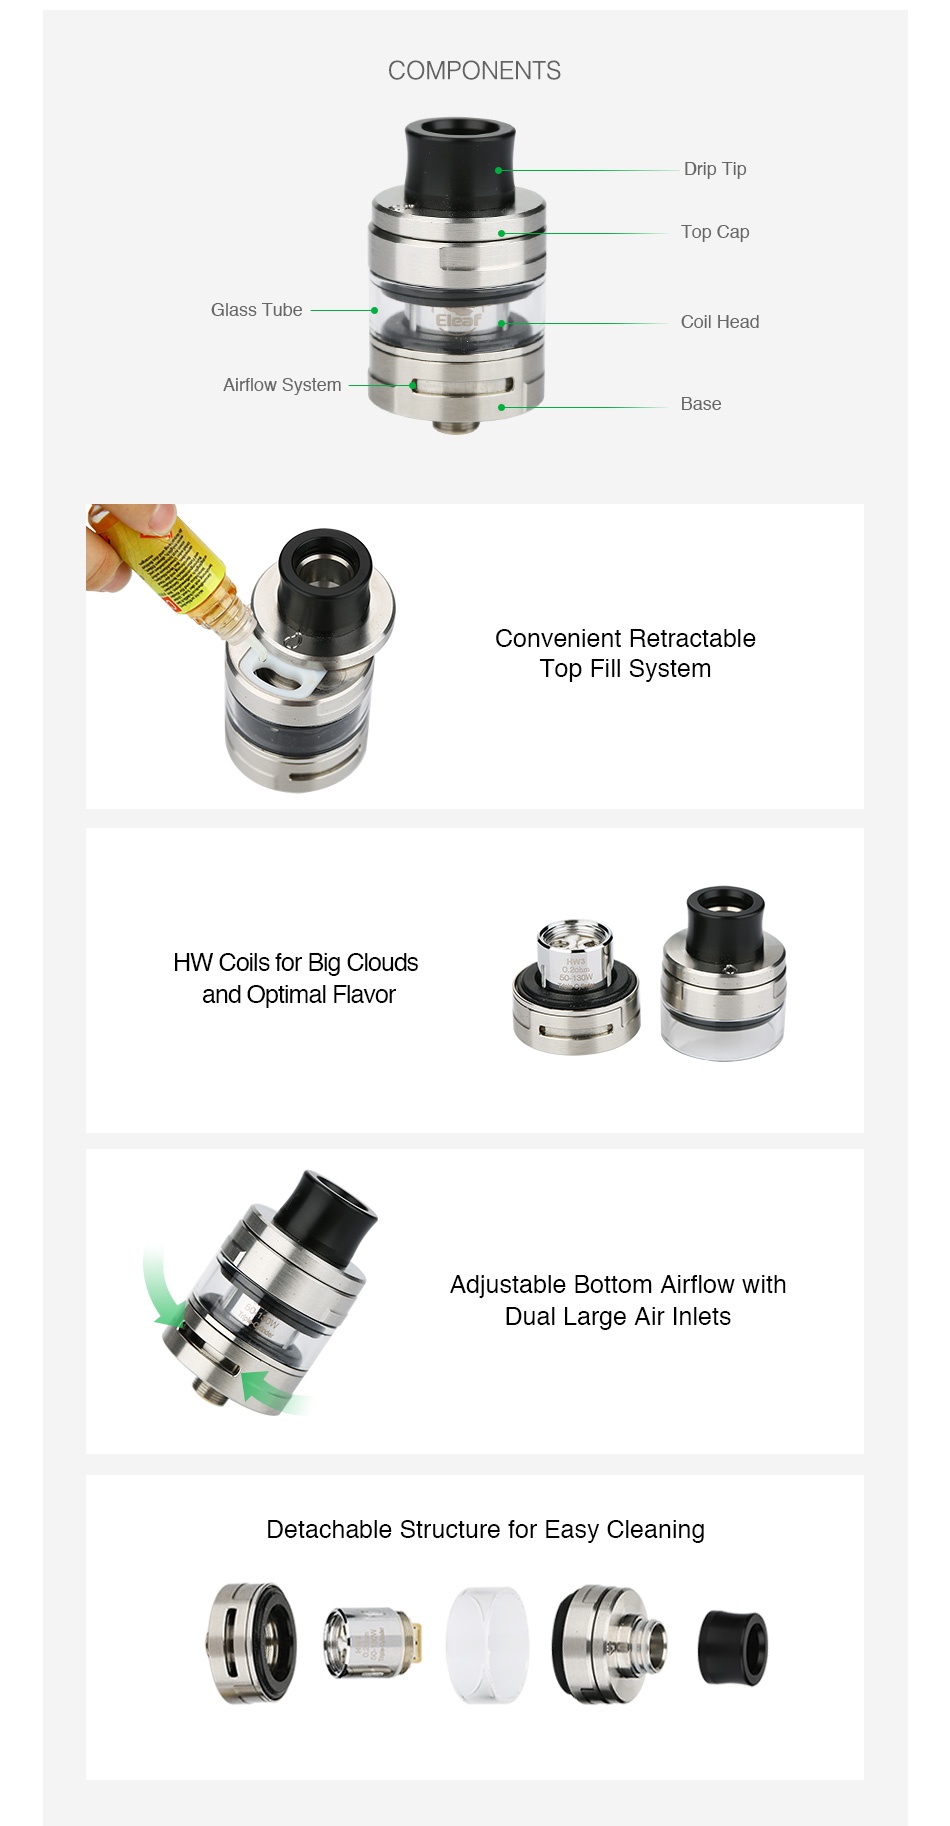 Eleaf ELLO S Atomizer 2ml COMPONENTS Drip tt Top Ca Glass Tube Coil head Airflow System ase Convenient retractable TopF  Syste   HW Coils for big clouds and optimal flavor Adjustable Bottom airflow with Dual Large Air Inlets Detachable Structure for Easy Cleaning  e